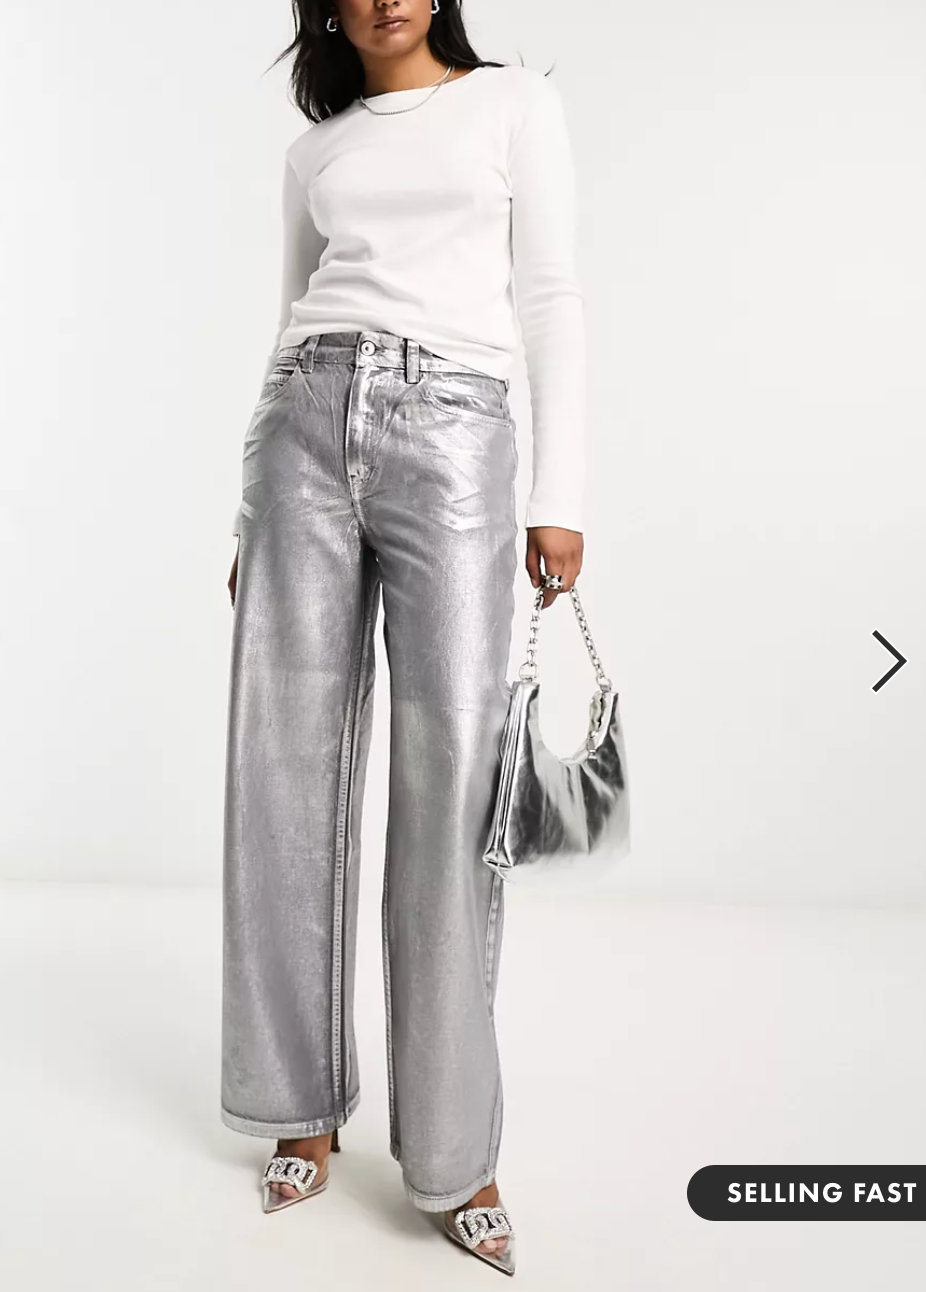 top of the charts  Silver jeans outfit, Silver pants, Silver outfits